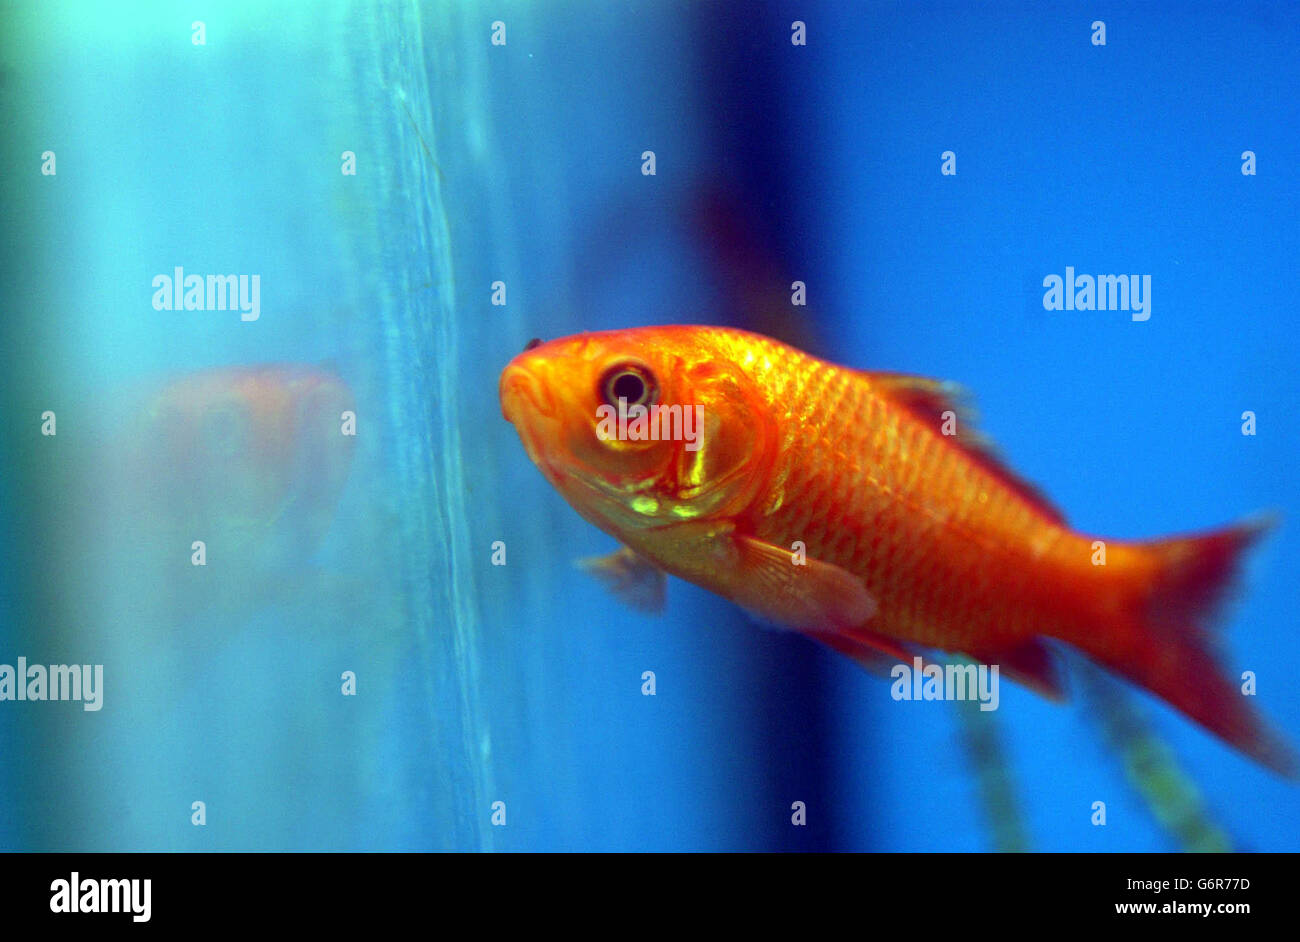 A general view of a Gold fish swimming inside a fish tank. Stock Photo